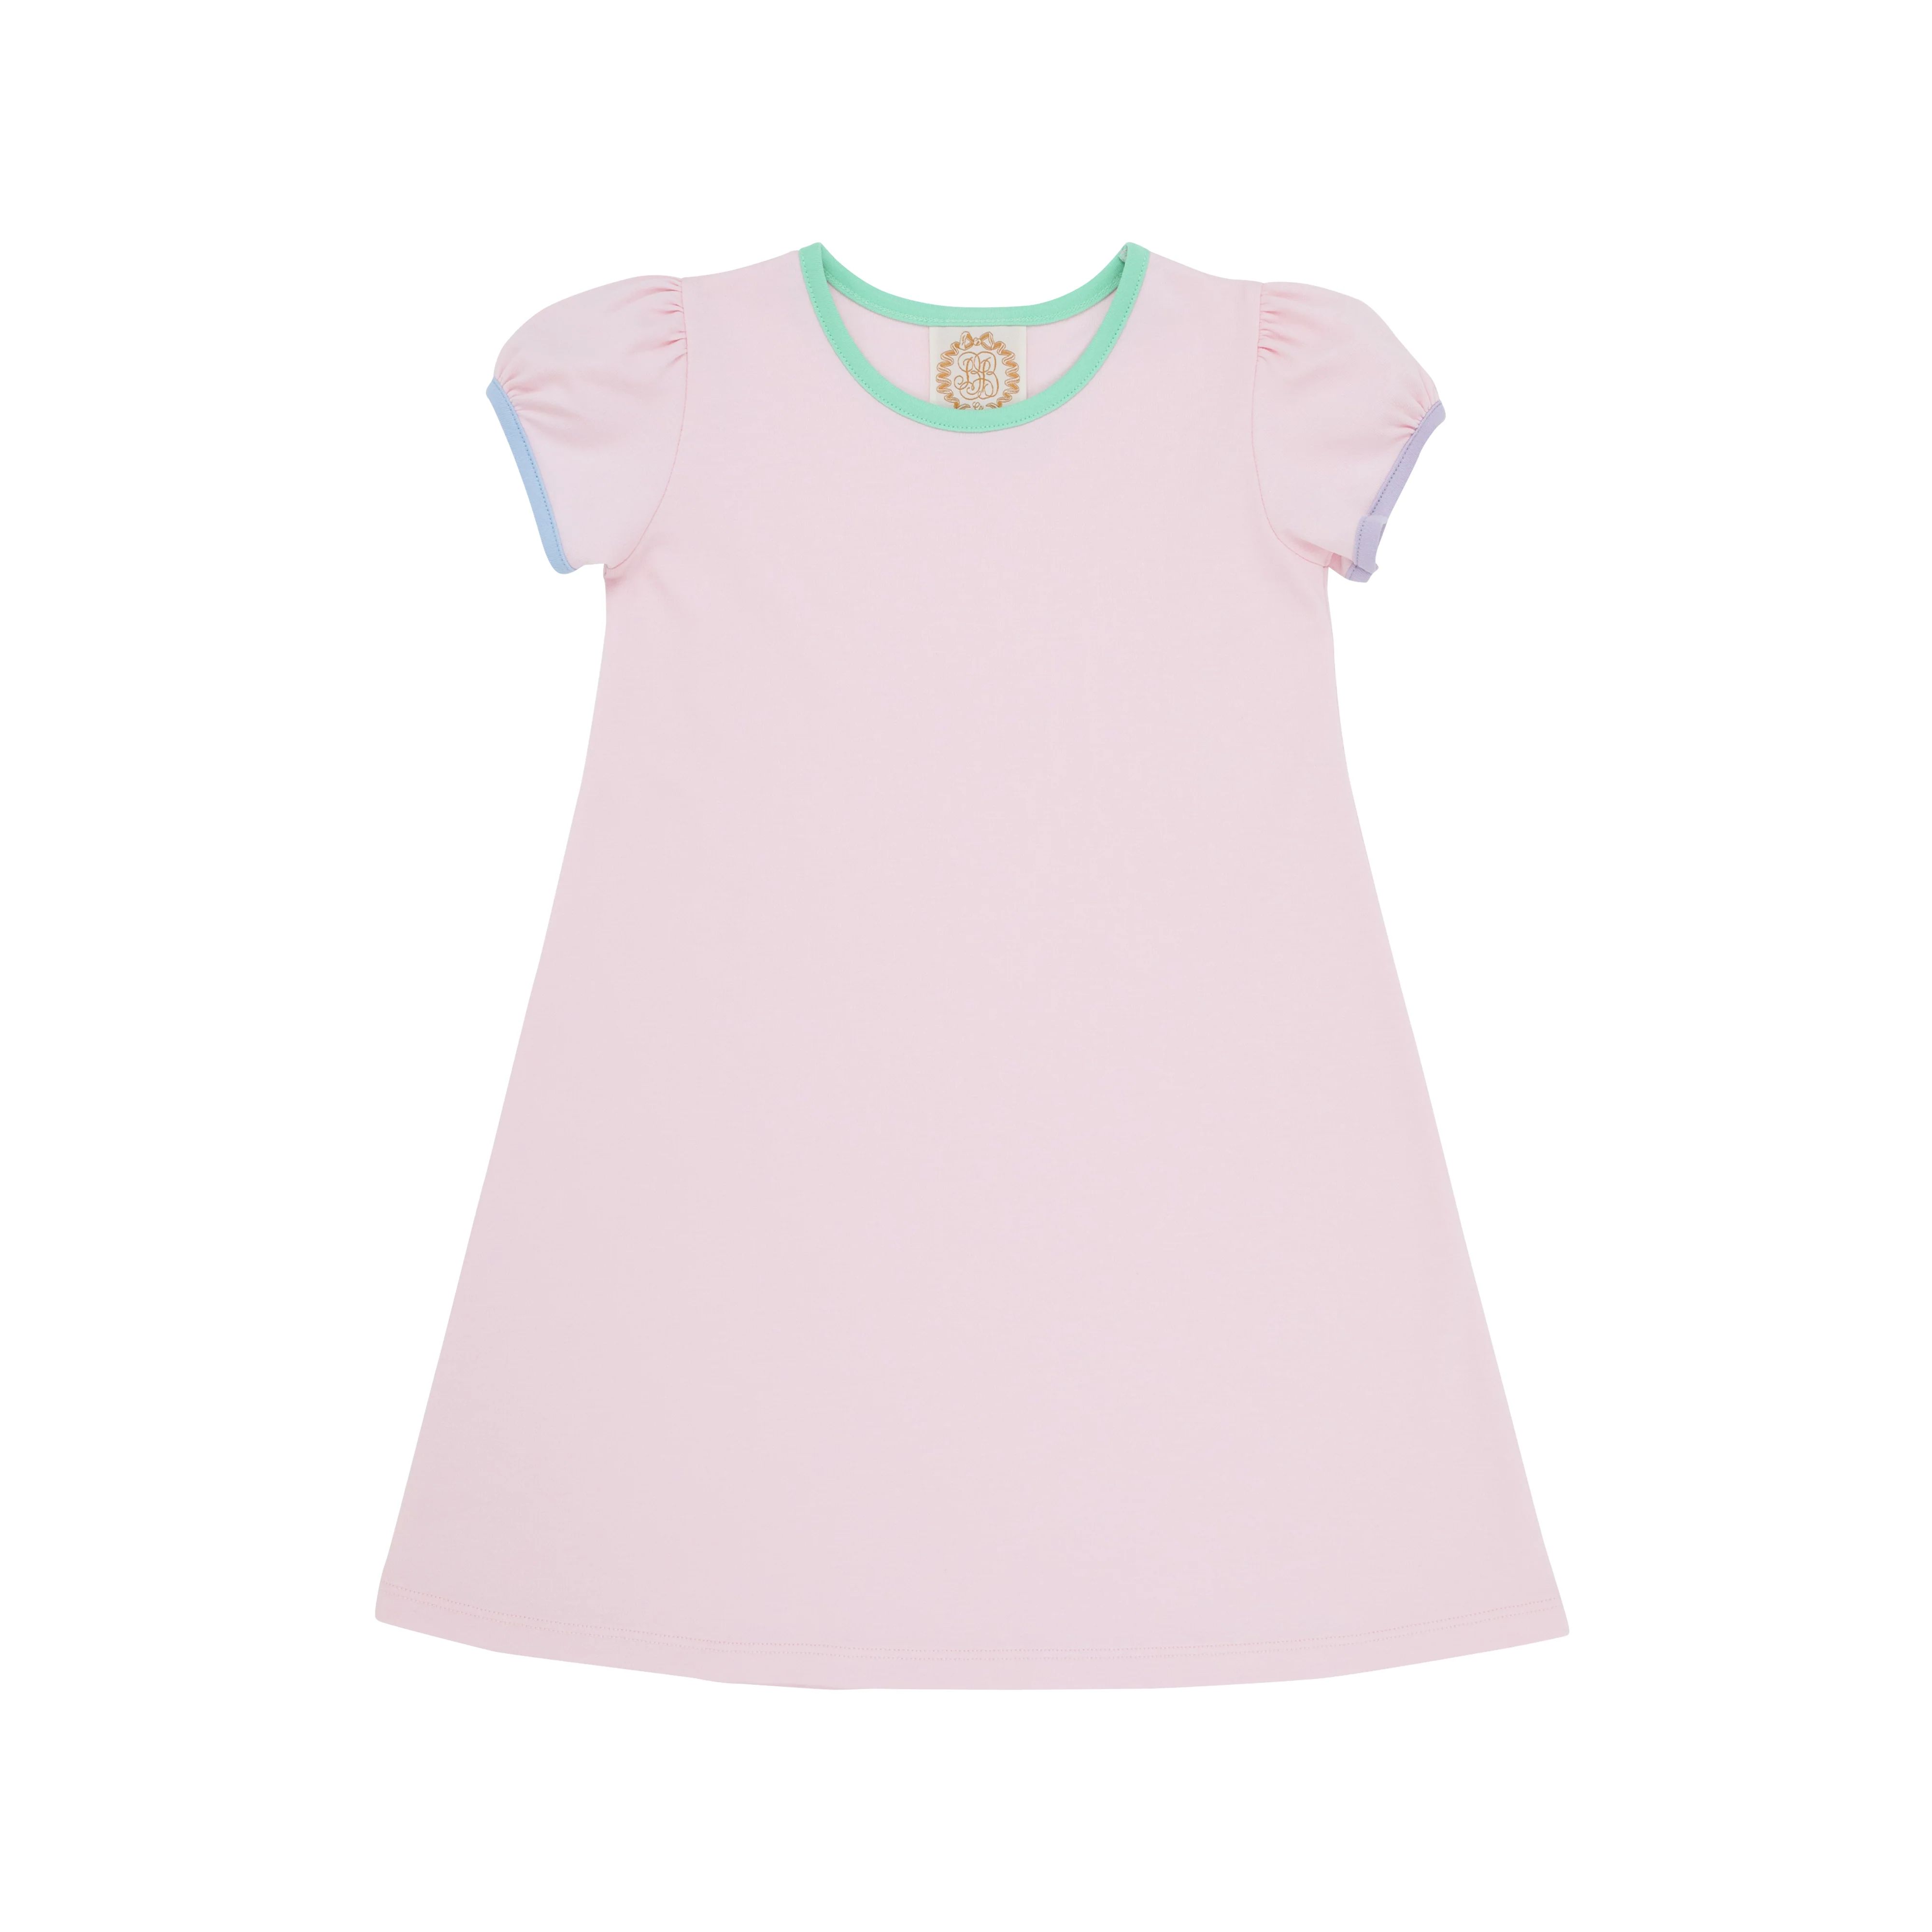 Penny's Play Dress - Palm Beach Pink with Grace Bay Green, Beale Street Blue, and Lauderdale Lave... | The Beaufort Bonnet Company